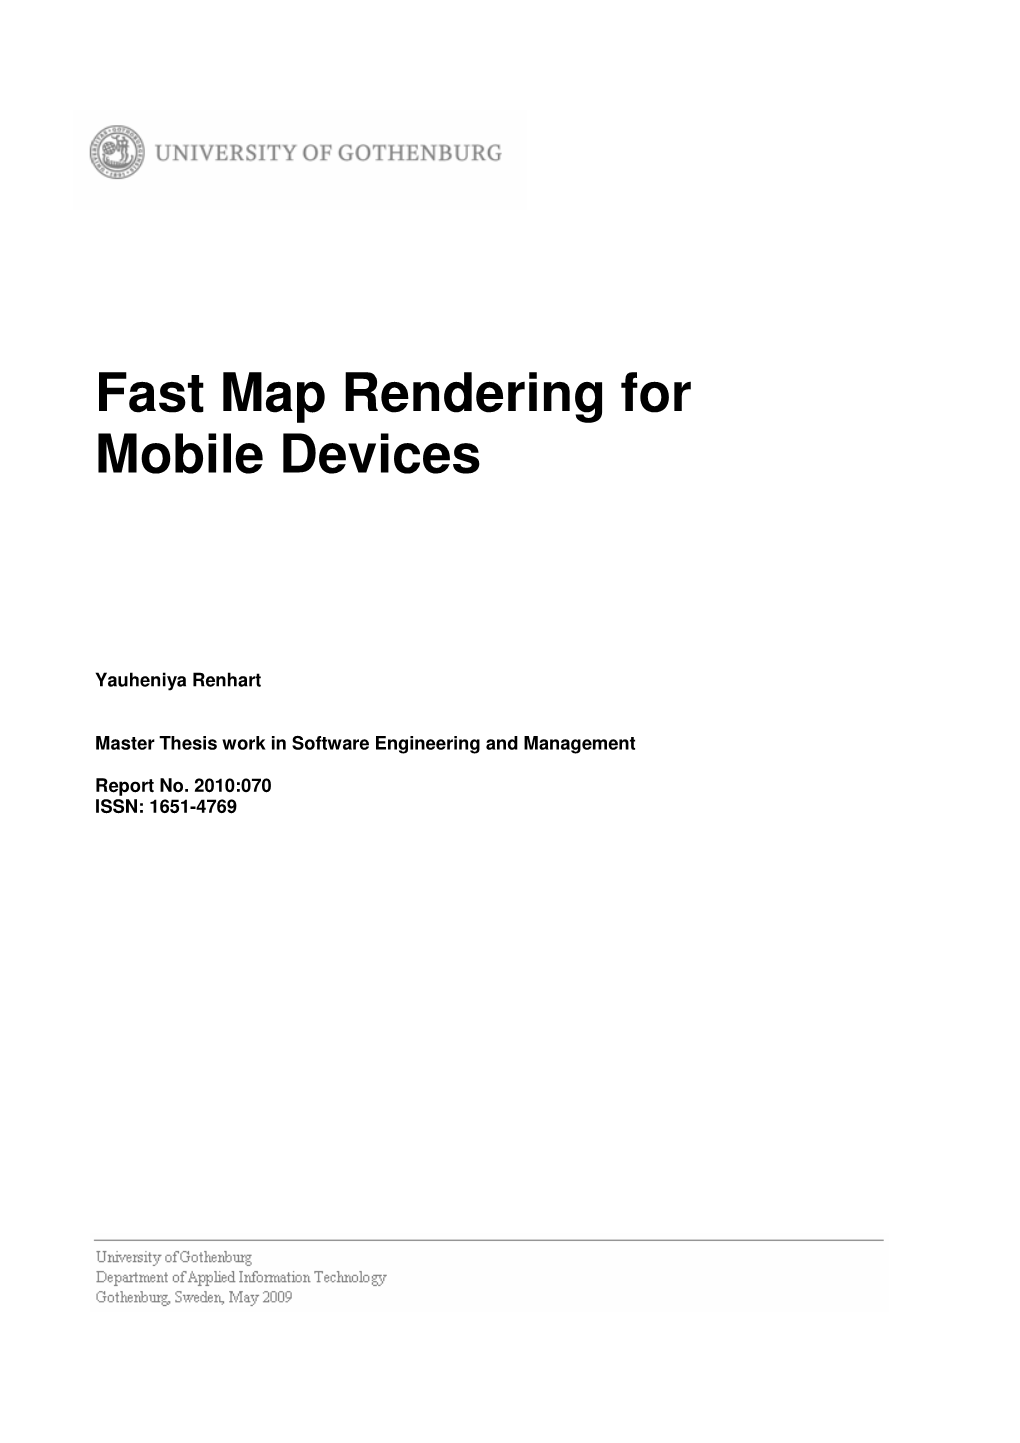 Fast Map Rendering for Mobile Devices